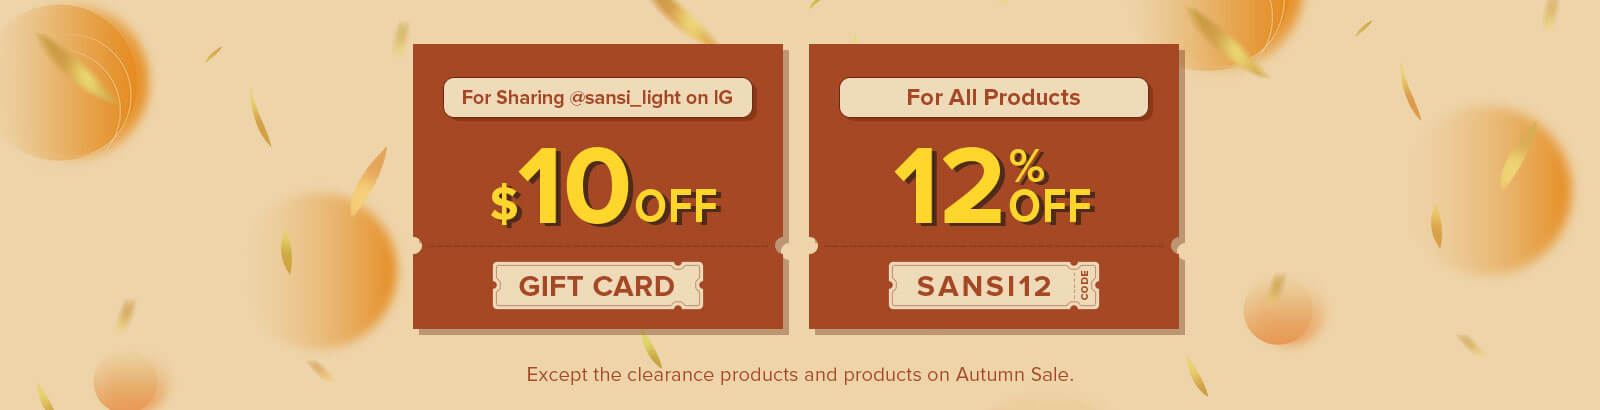 For All Products 12% OFF,Use code "SANSI12",Except the clearance products and products on Autumn Sale.